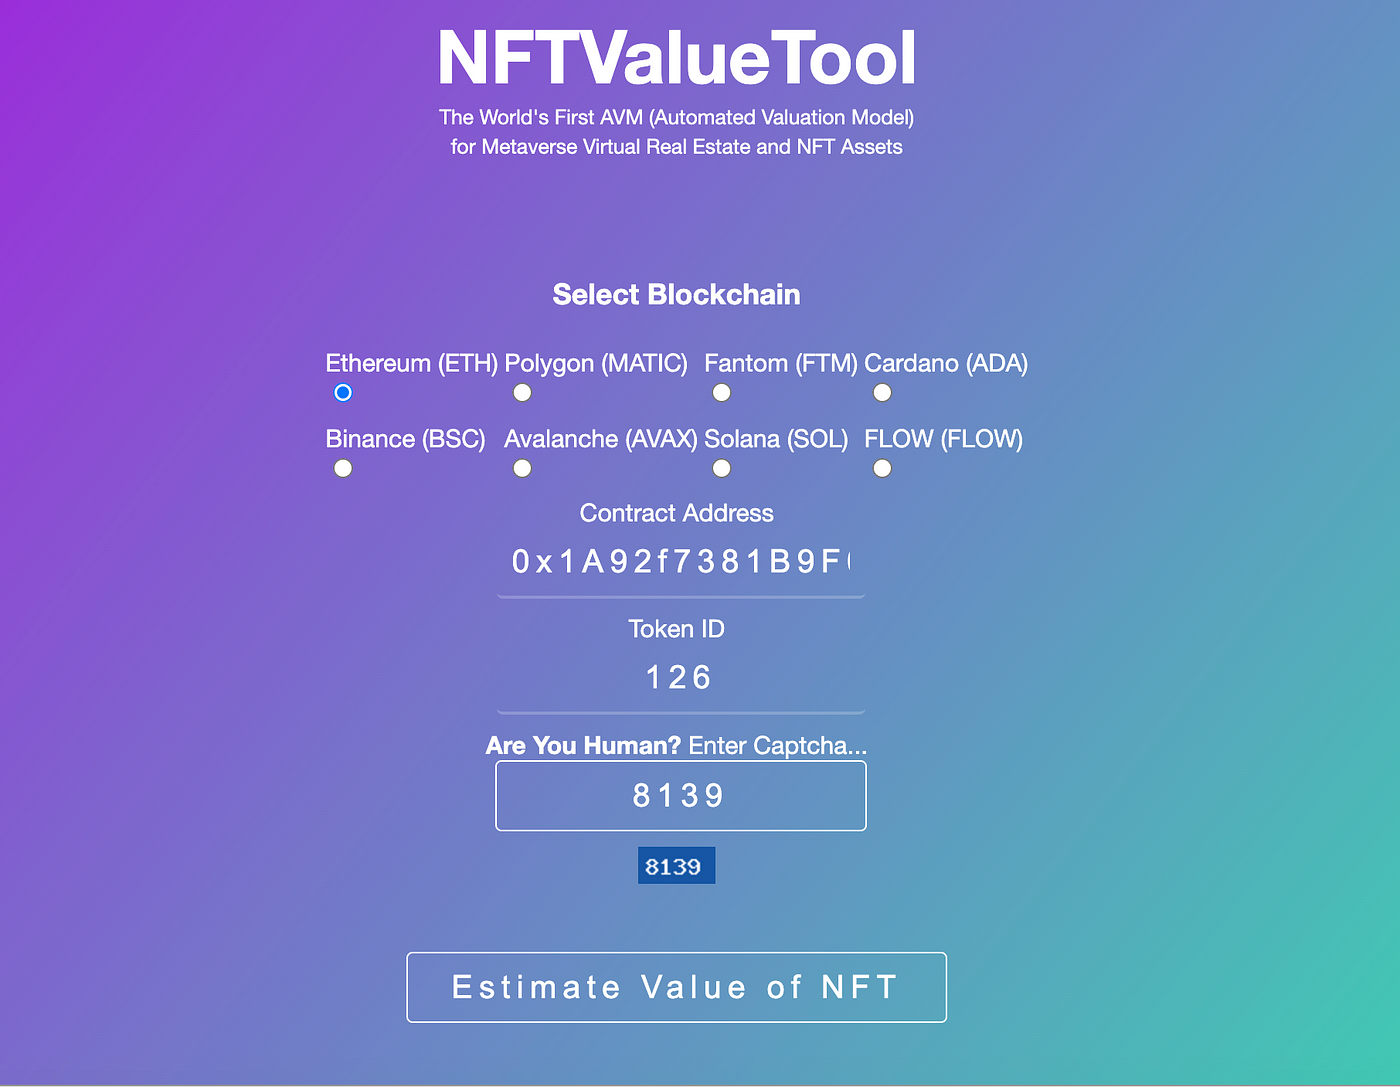 NFT Value Tool Price Prediction Interface